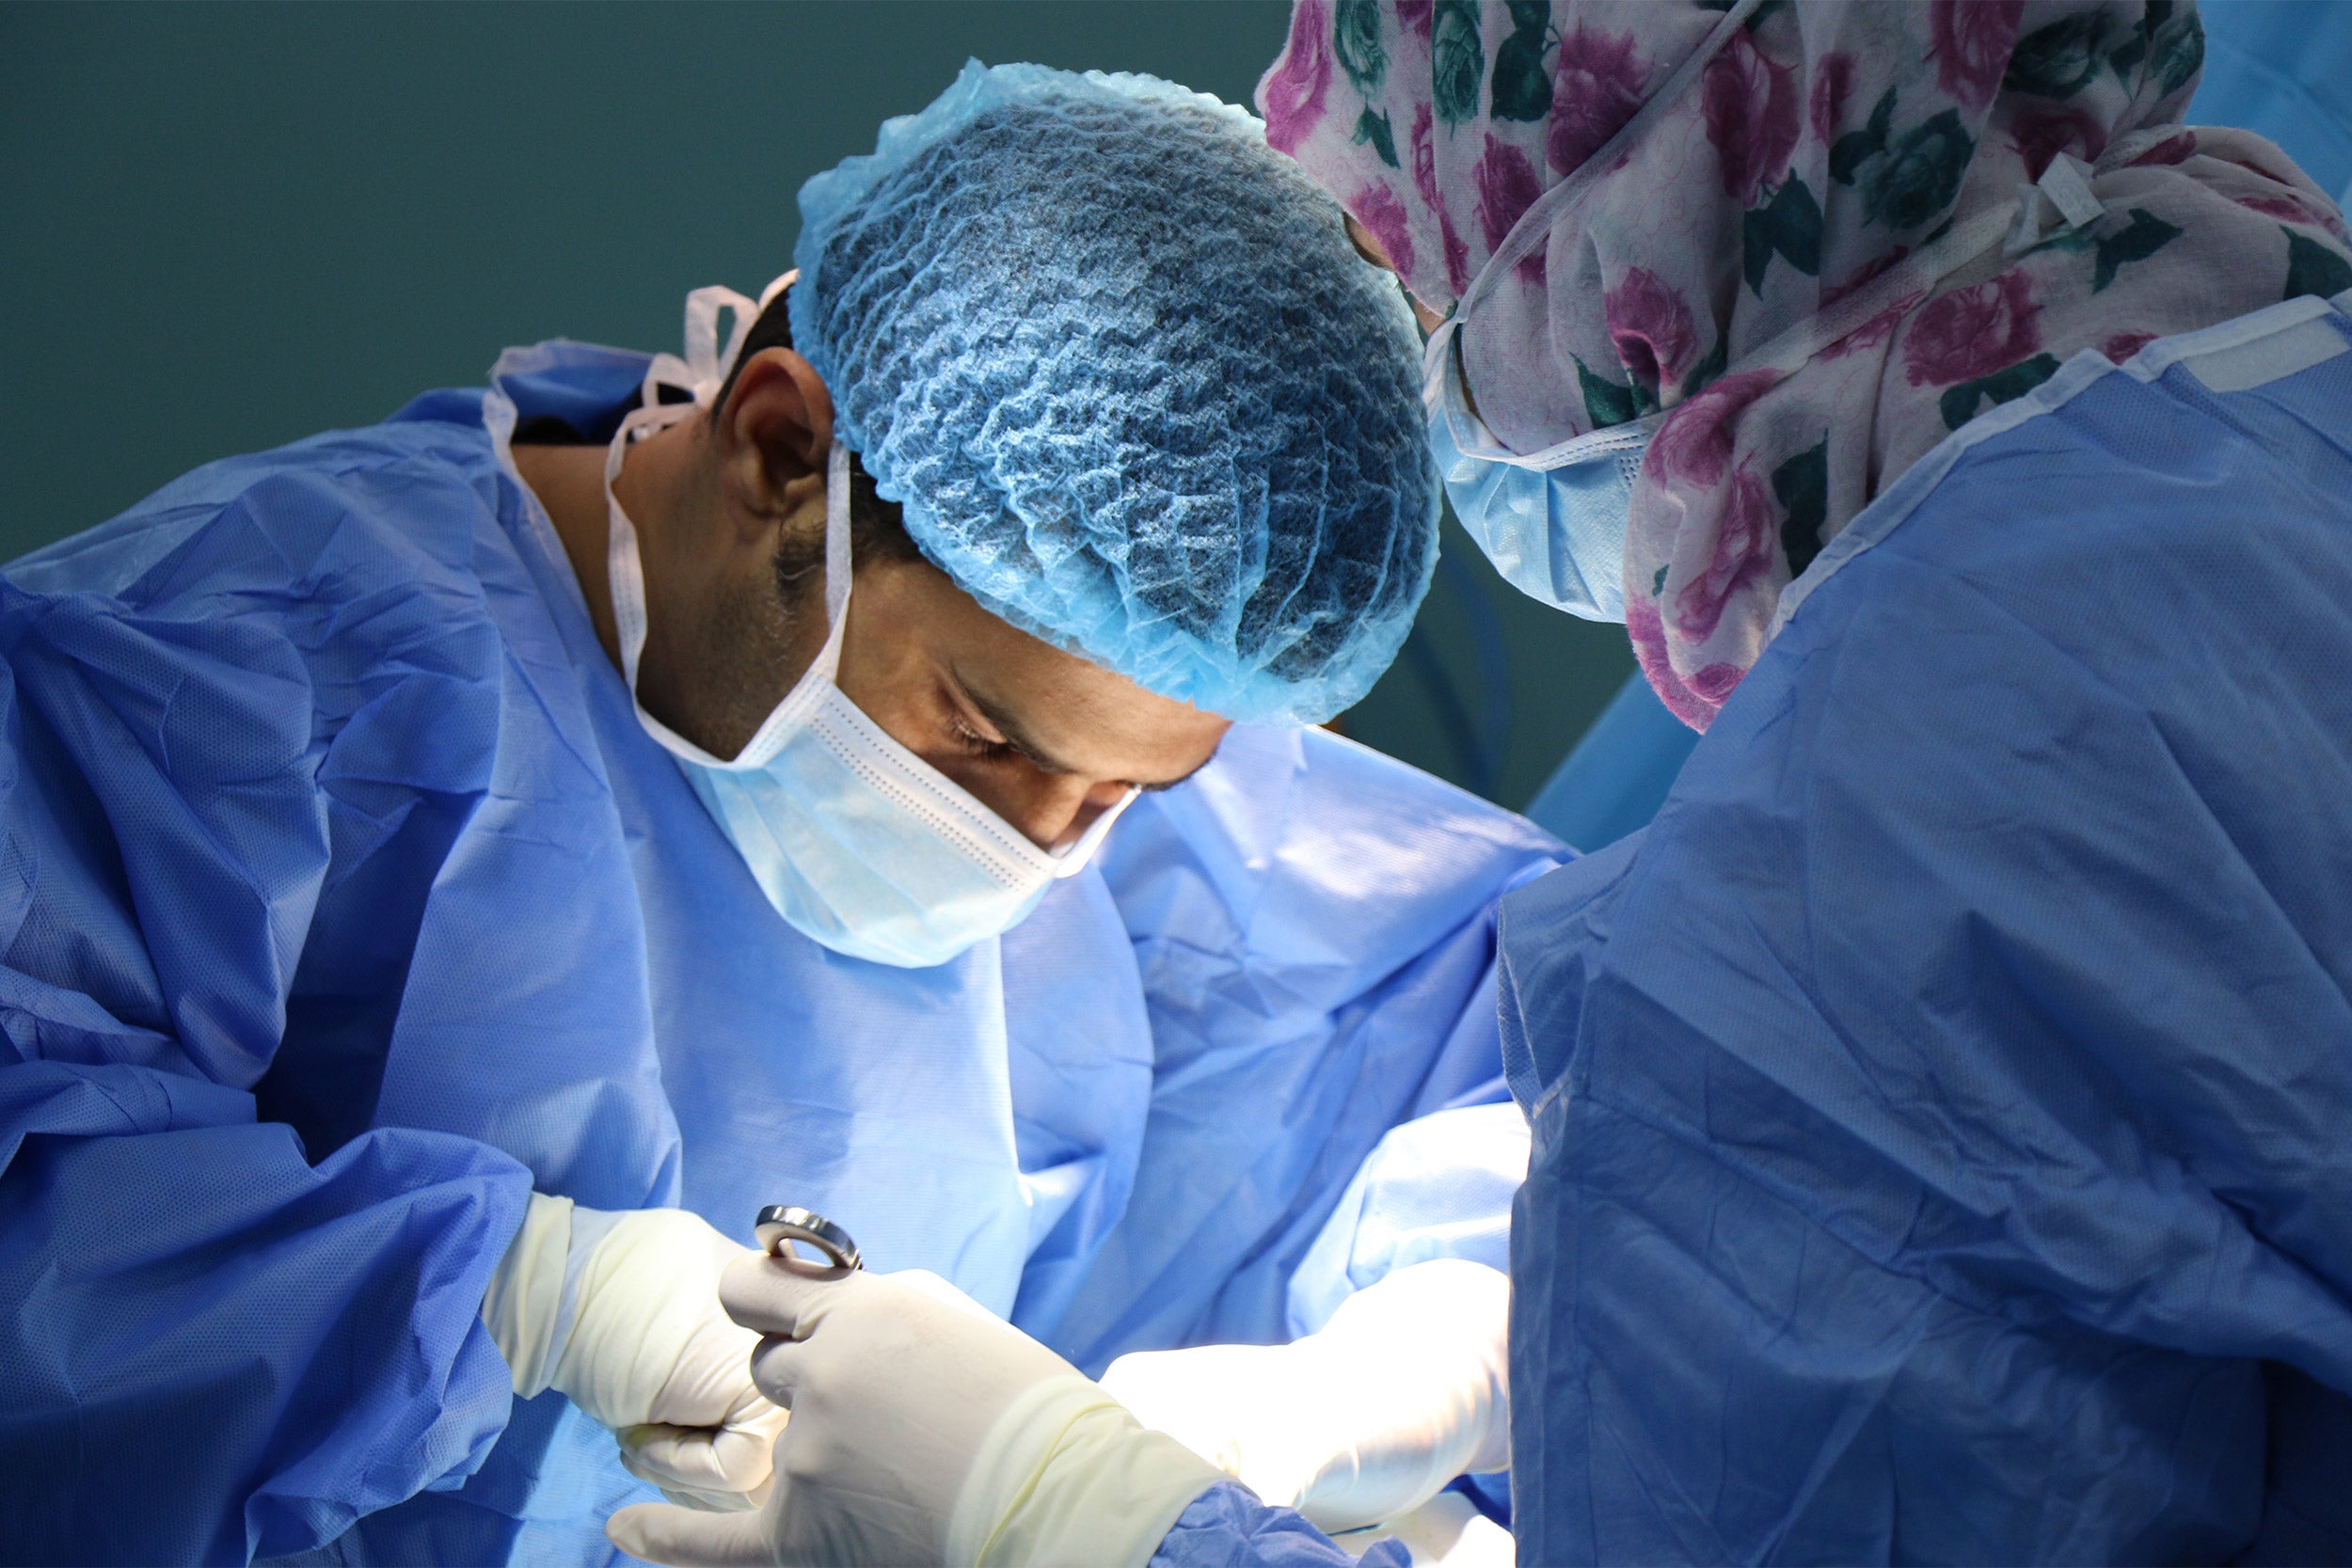 Doctor performing surgery, nurse in head a hijab or headscarf.